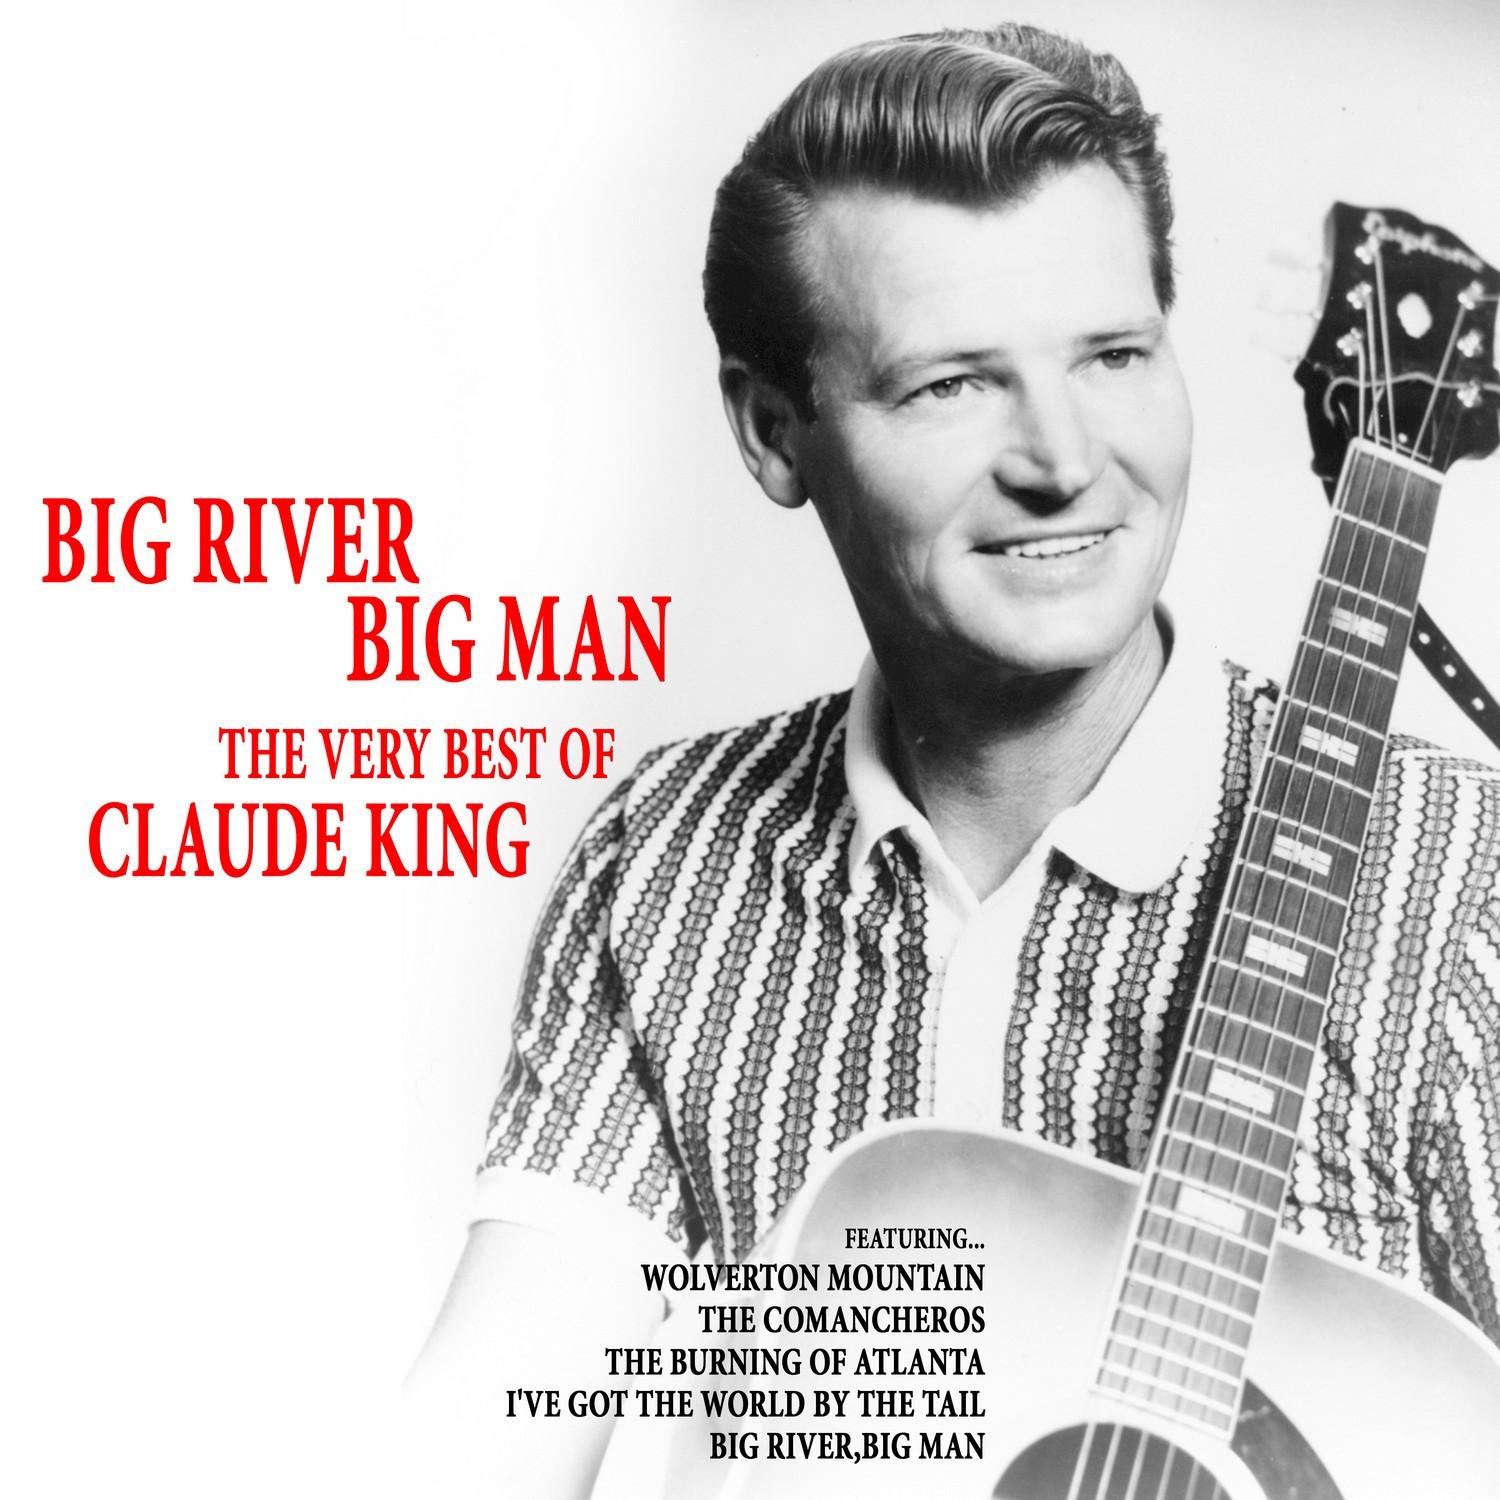 Big River, Big Man: The Very Best of Claude King